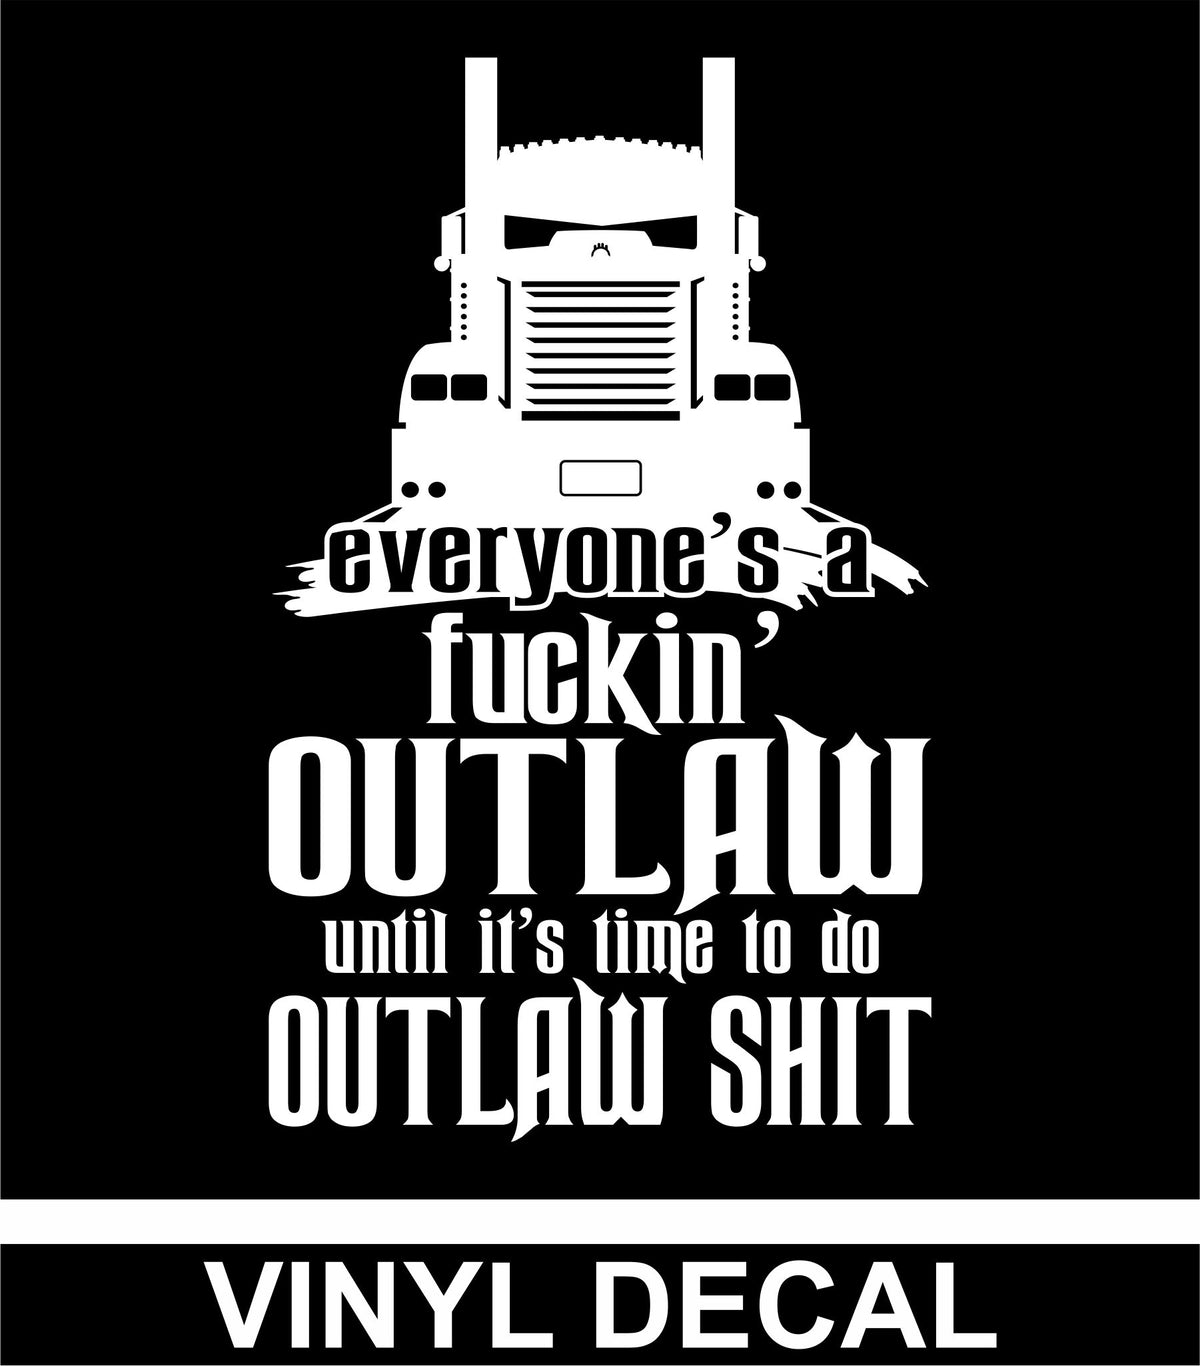 Everyone's a Fuckin' Outlaw - KW 900  - Vinyl Decal - Free Shipping